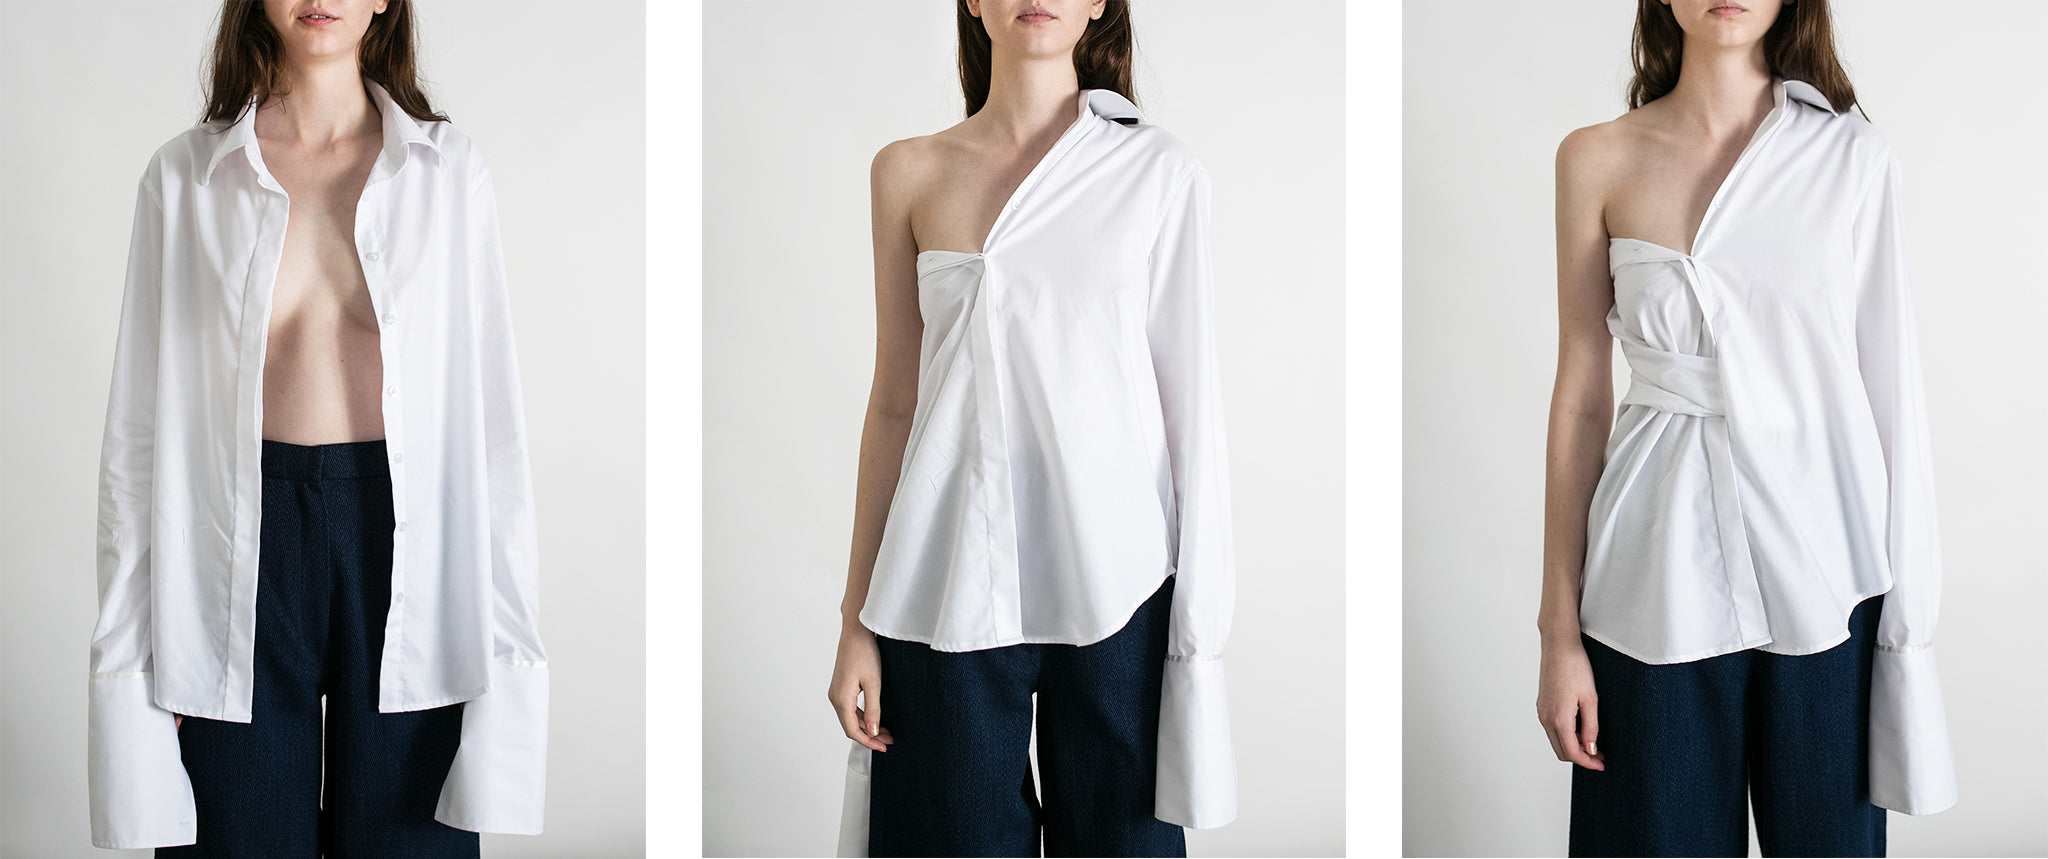 How to fold and tuck shirting anna quan